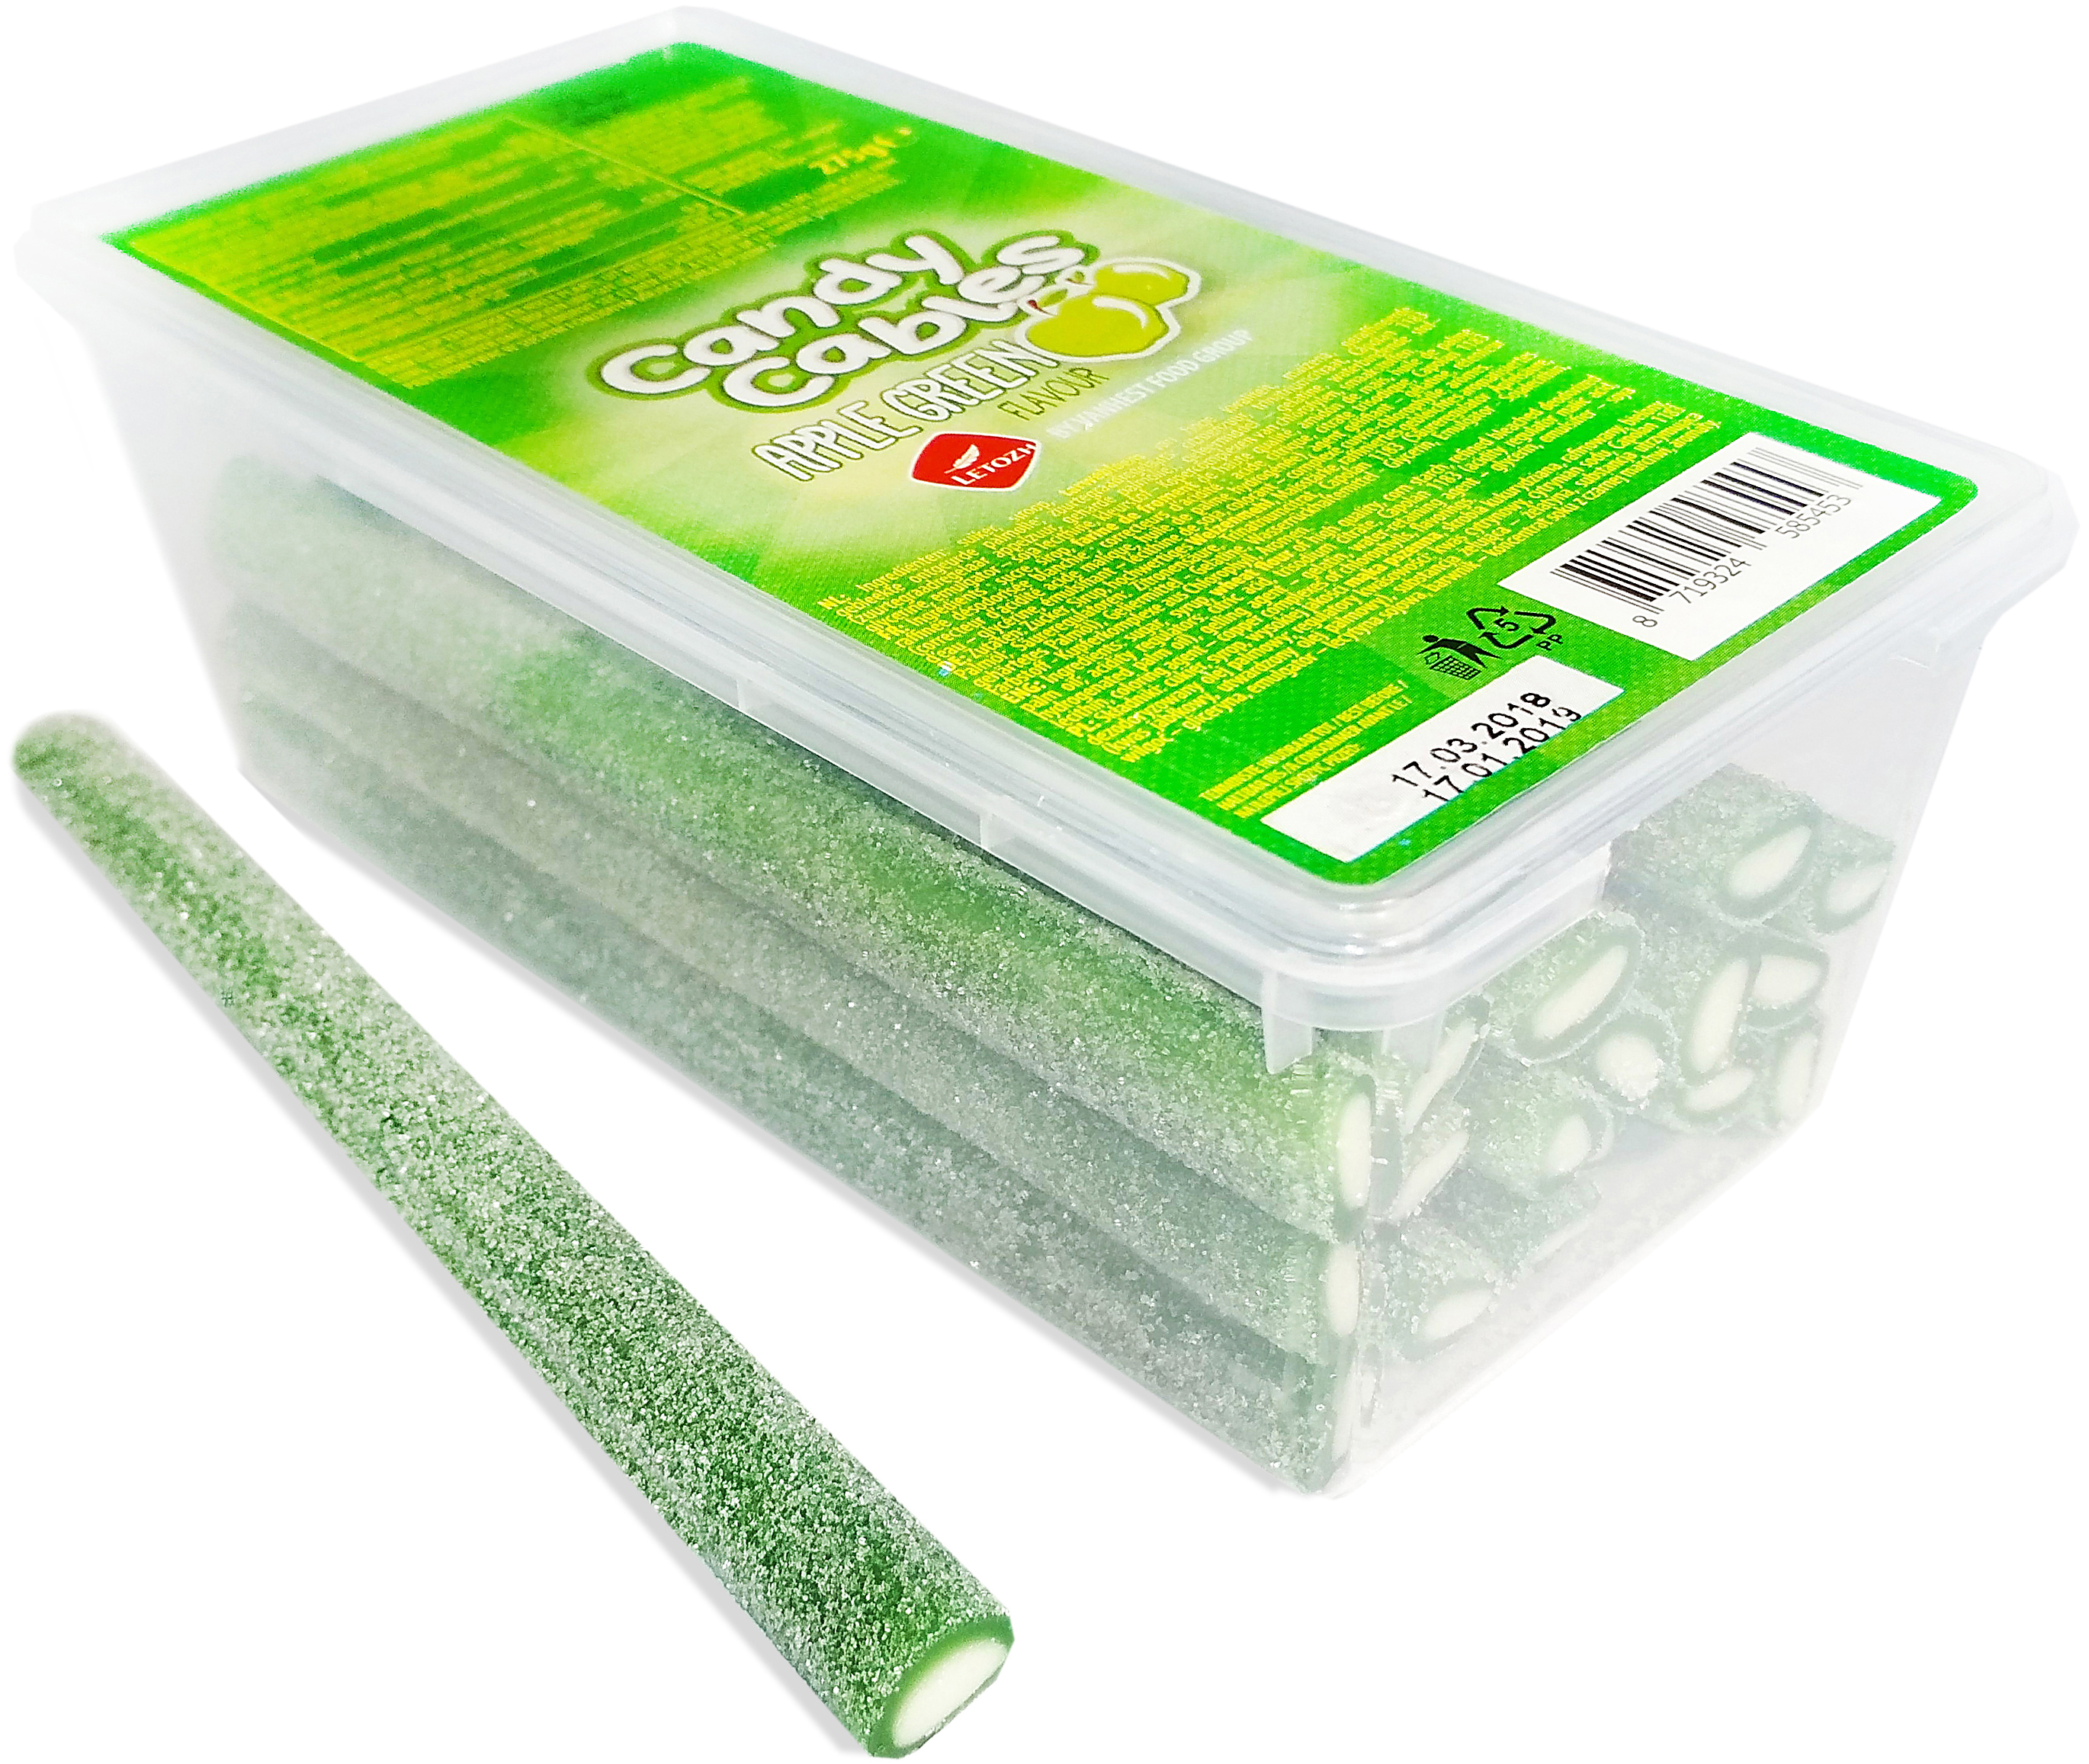 Cables со вкусом green apple flavour sweets in sour-sweet dusting, jelly filled